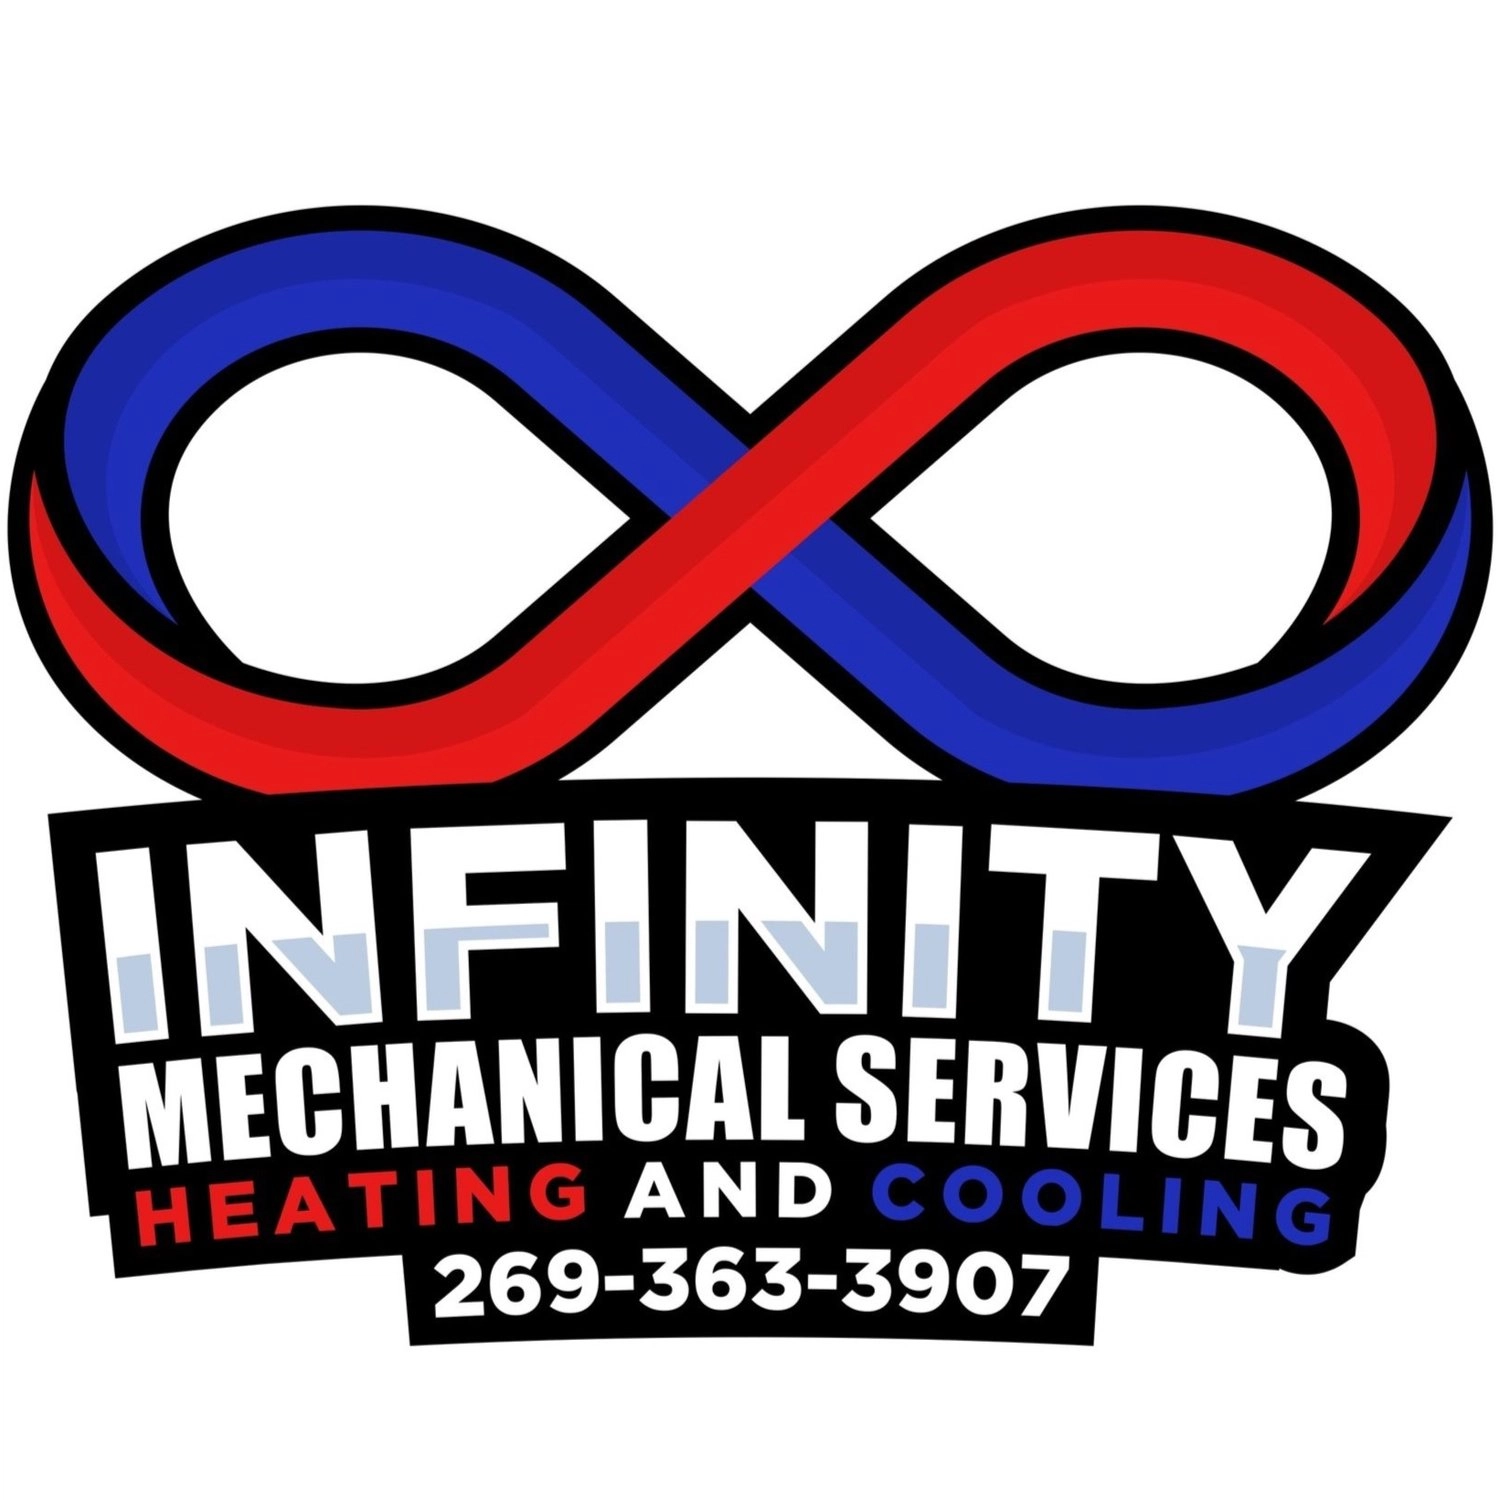 Infinity Mechanical Services Logo